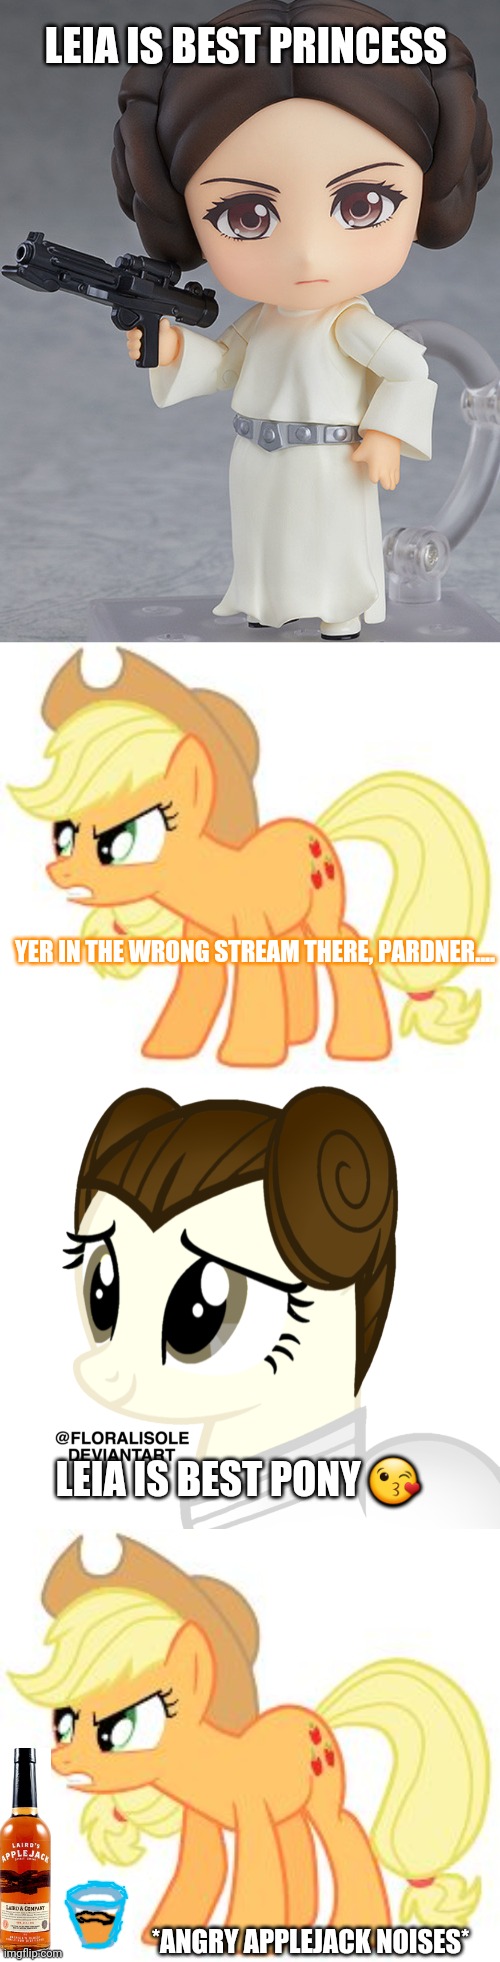 LEIA IS BEST PRINCESS; YER IN THE WRONG STREAM THERE, PARDNER.... LEIA IS BEST PONY 😘; *ANGRY APPLEJACK NOISES* | image tagged in angry applejack,princess leia | made w/ Imgflip meme maker